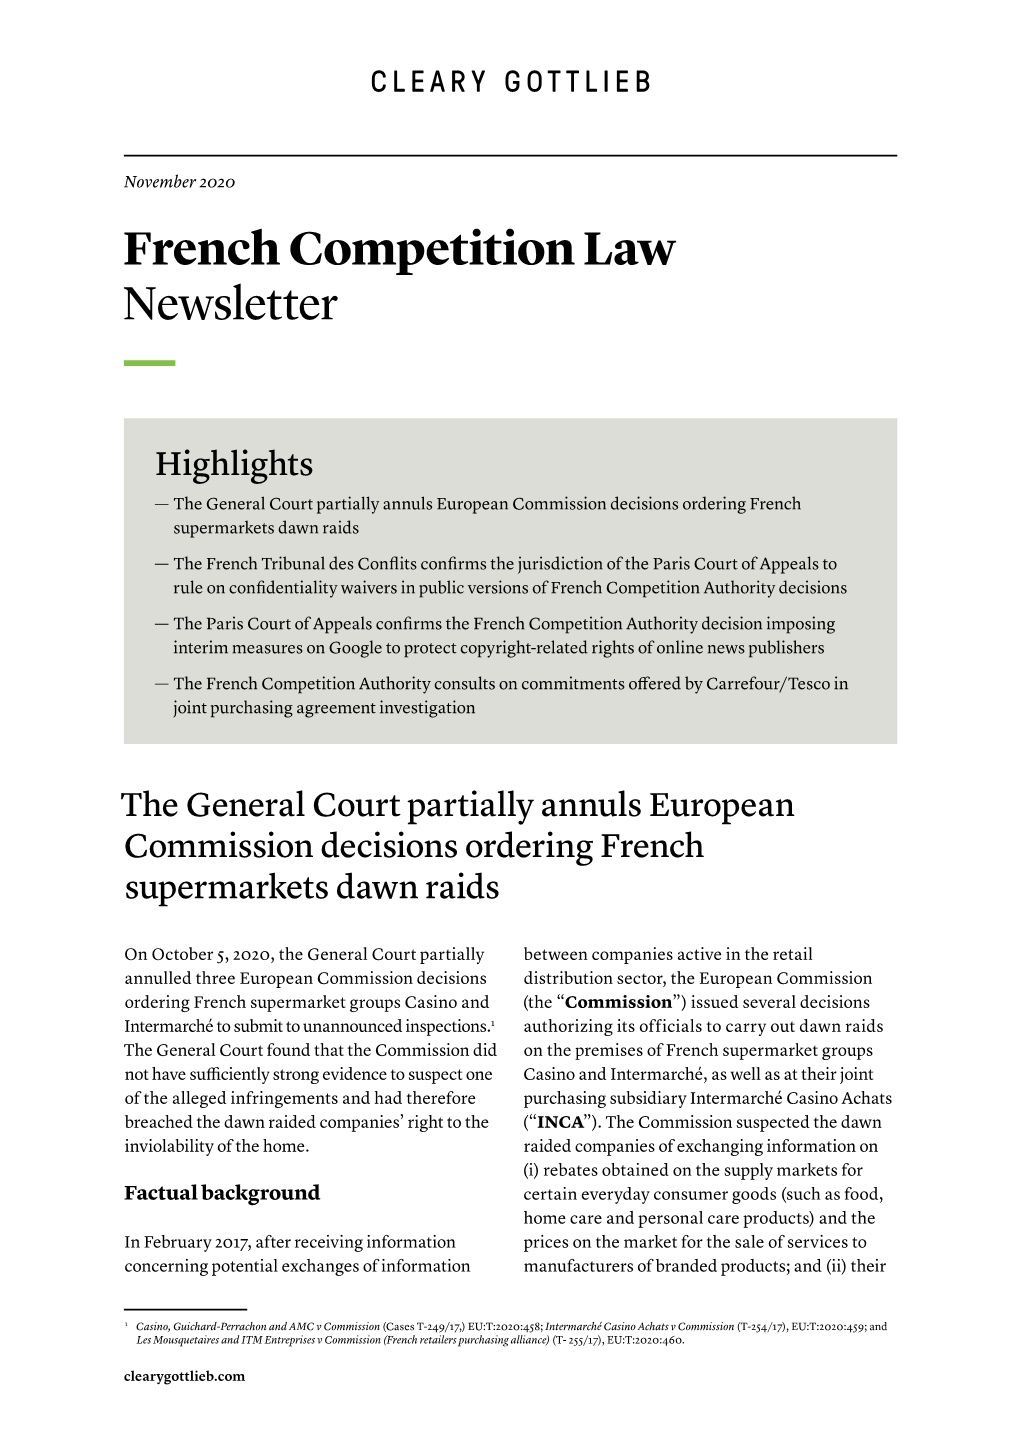 November 2020 French Competition Law Newsletter